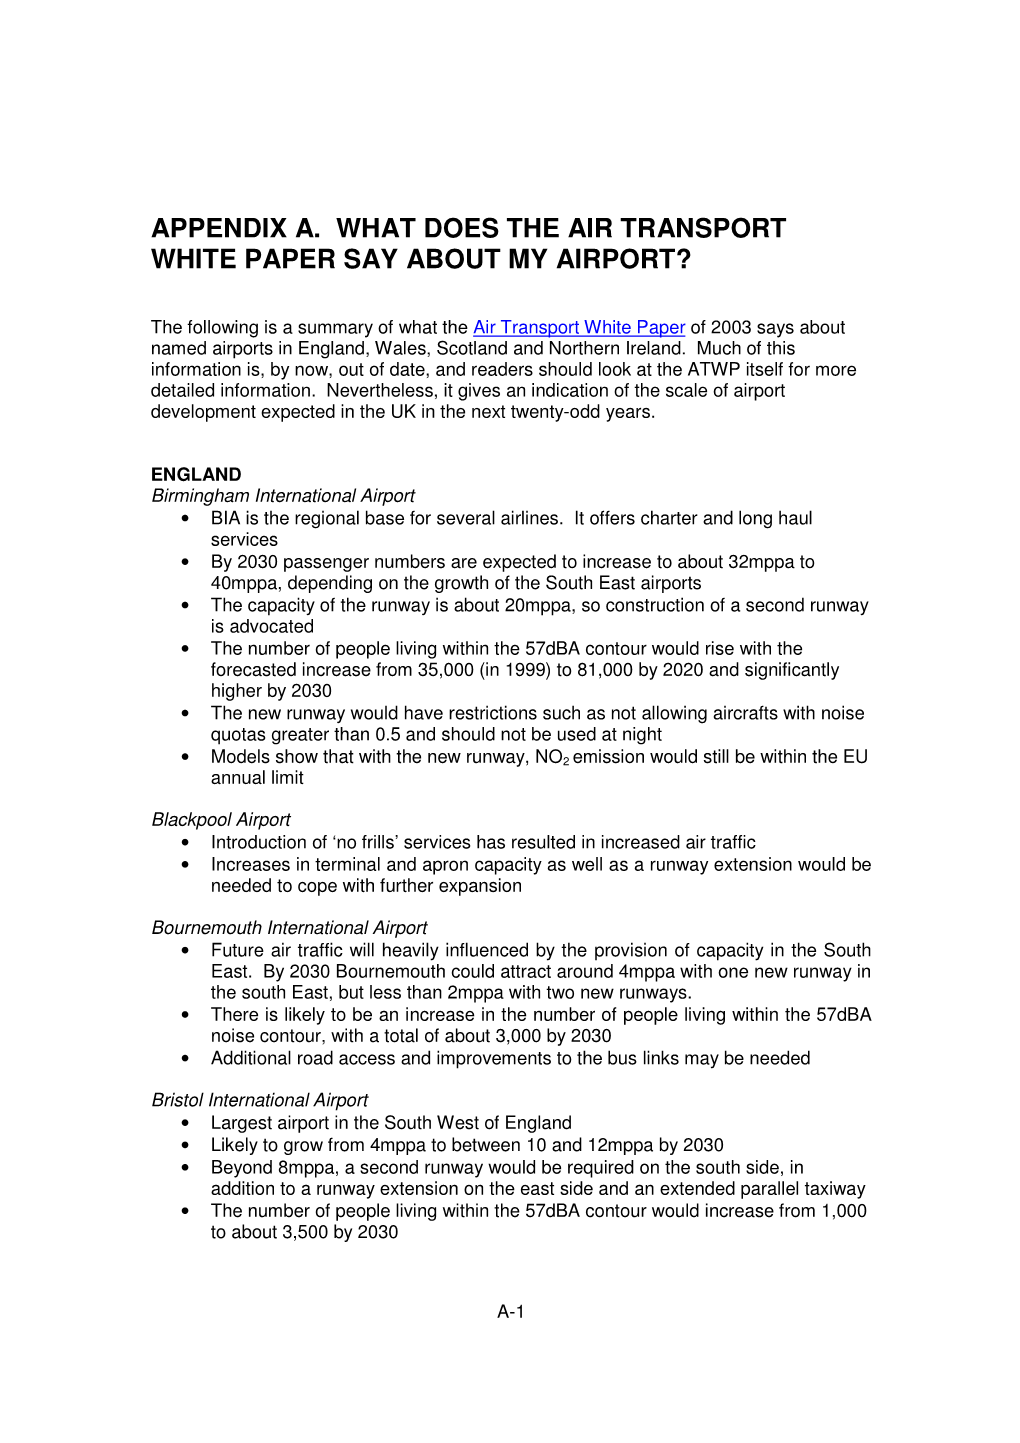 Appendix A. What Does the Air Transport White Paper Say About My Airport?